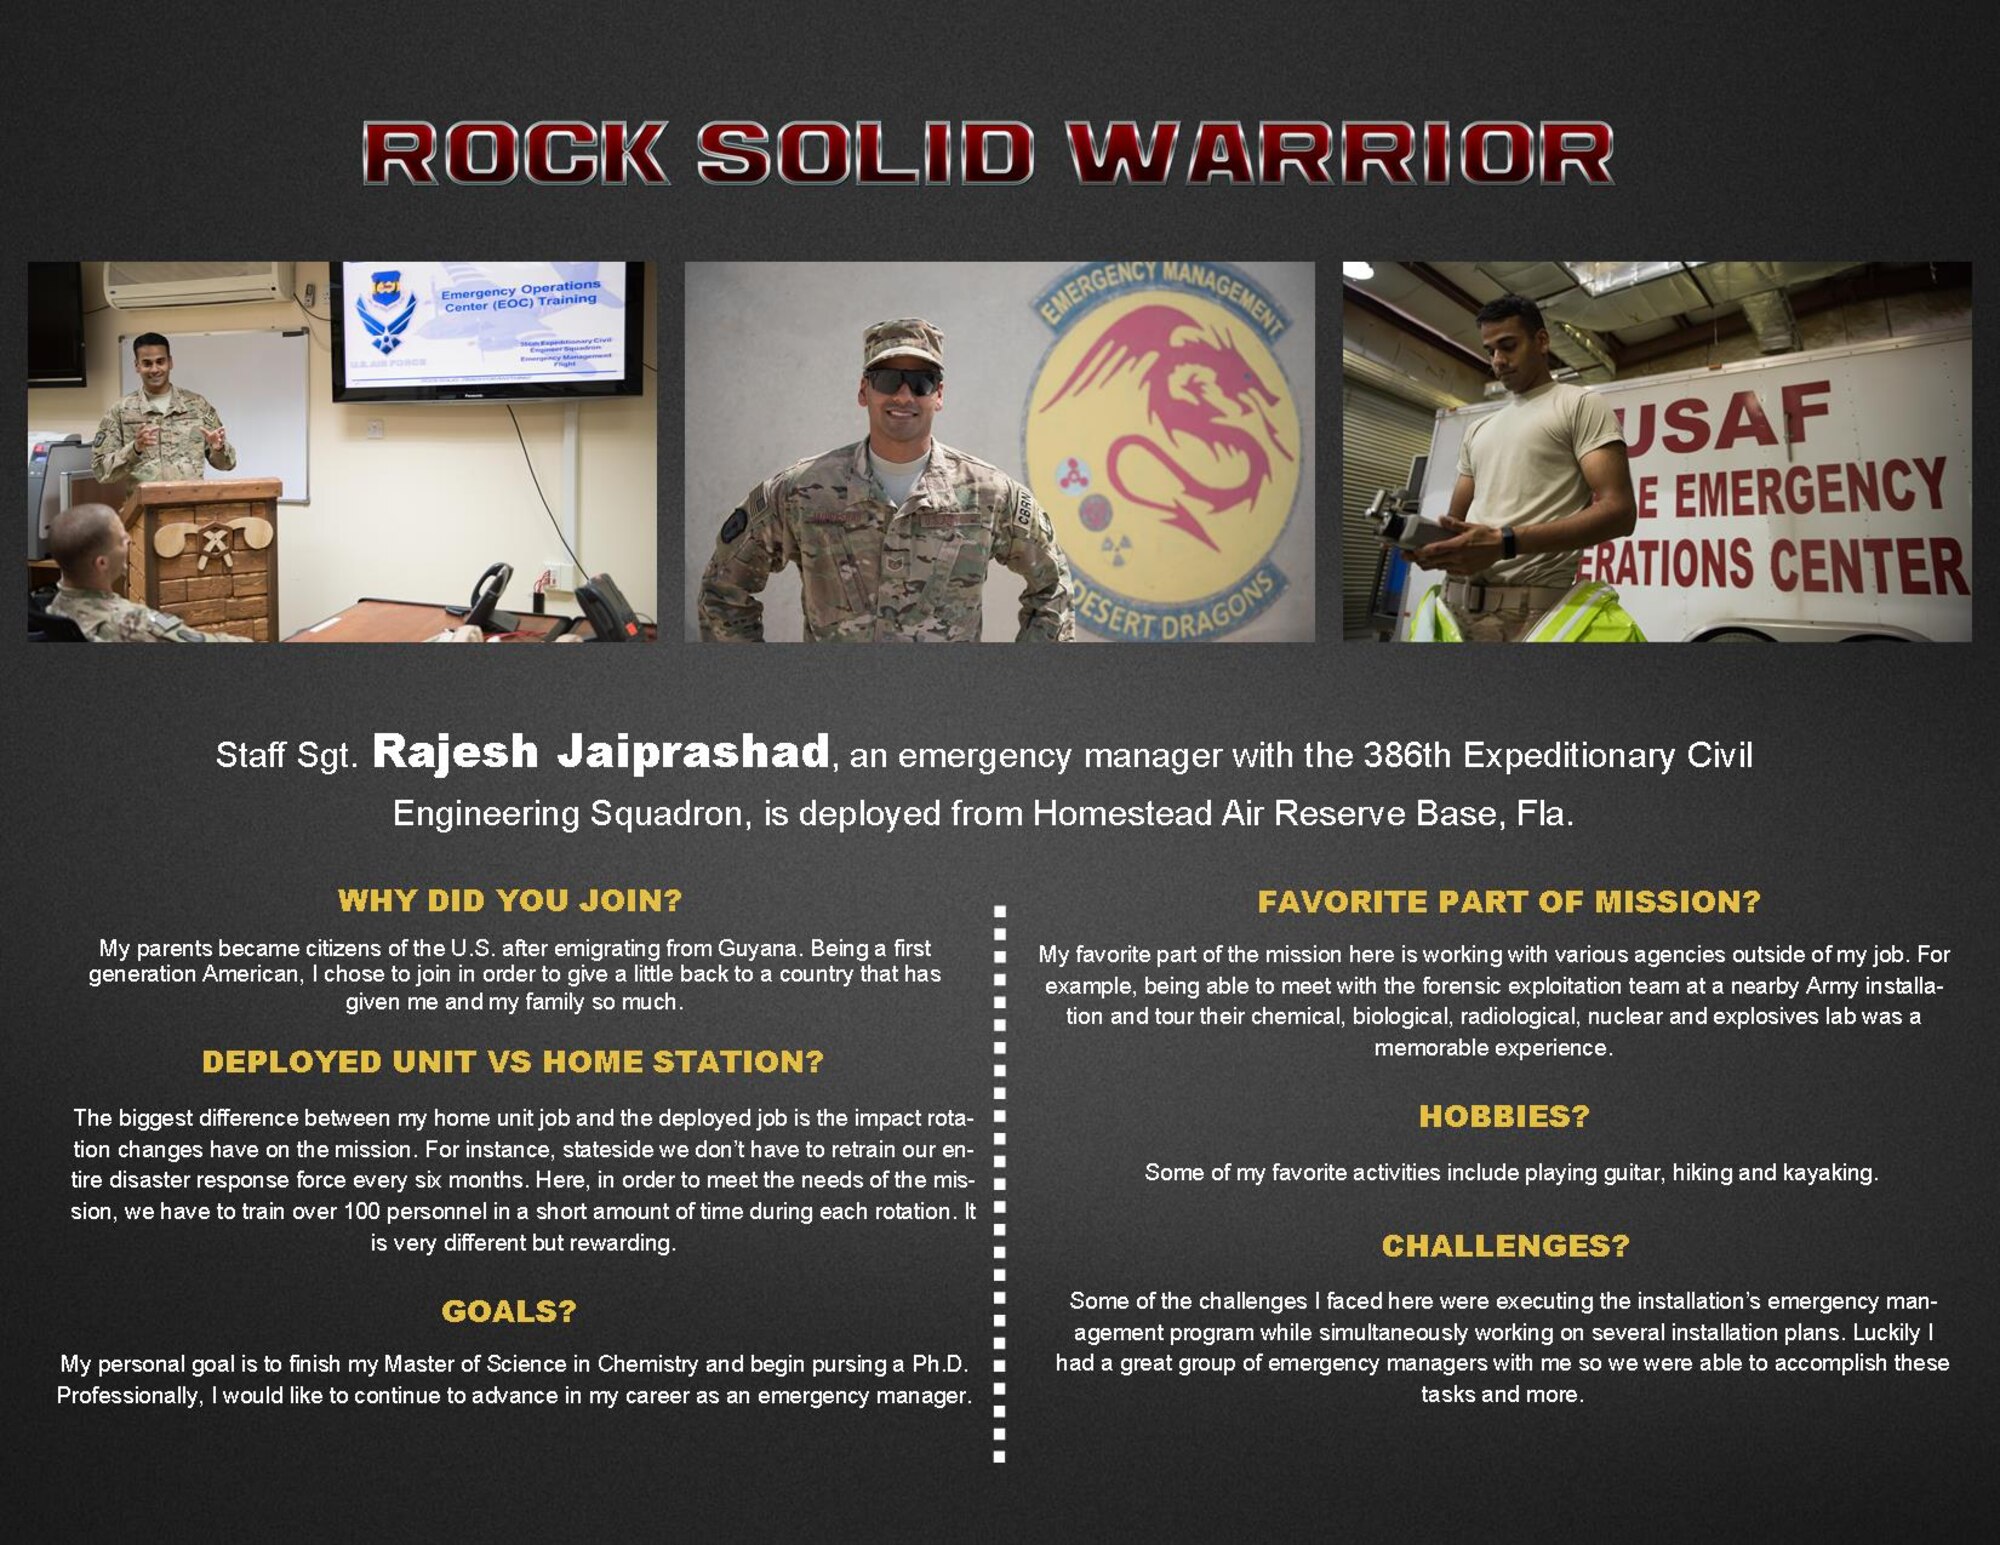 This week's Rock Solid Warrior is Staff Sgt. Rajesh Jaiprashad, a 386th Expeditionary Civil Engineering Squadron, emergency manager, deployed from Homestead Air Reserve Base, Florida. The Rock Solid Warrior program is a way to recognize and spotlight the Airmen of the 386th Air Expeditionary Wing for their positive impact and commitment to the mission. (U.S. Air Force graphic by Tech. Sgt. Jonathan Hehnly)